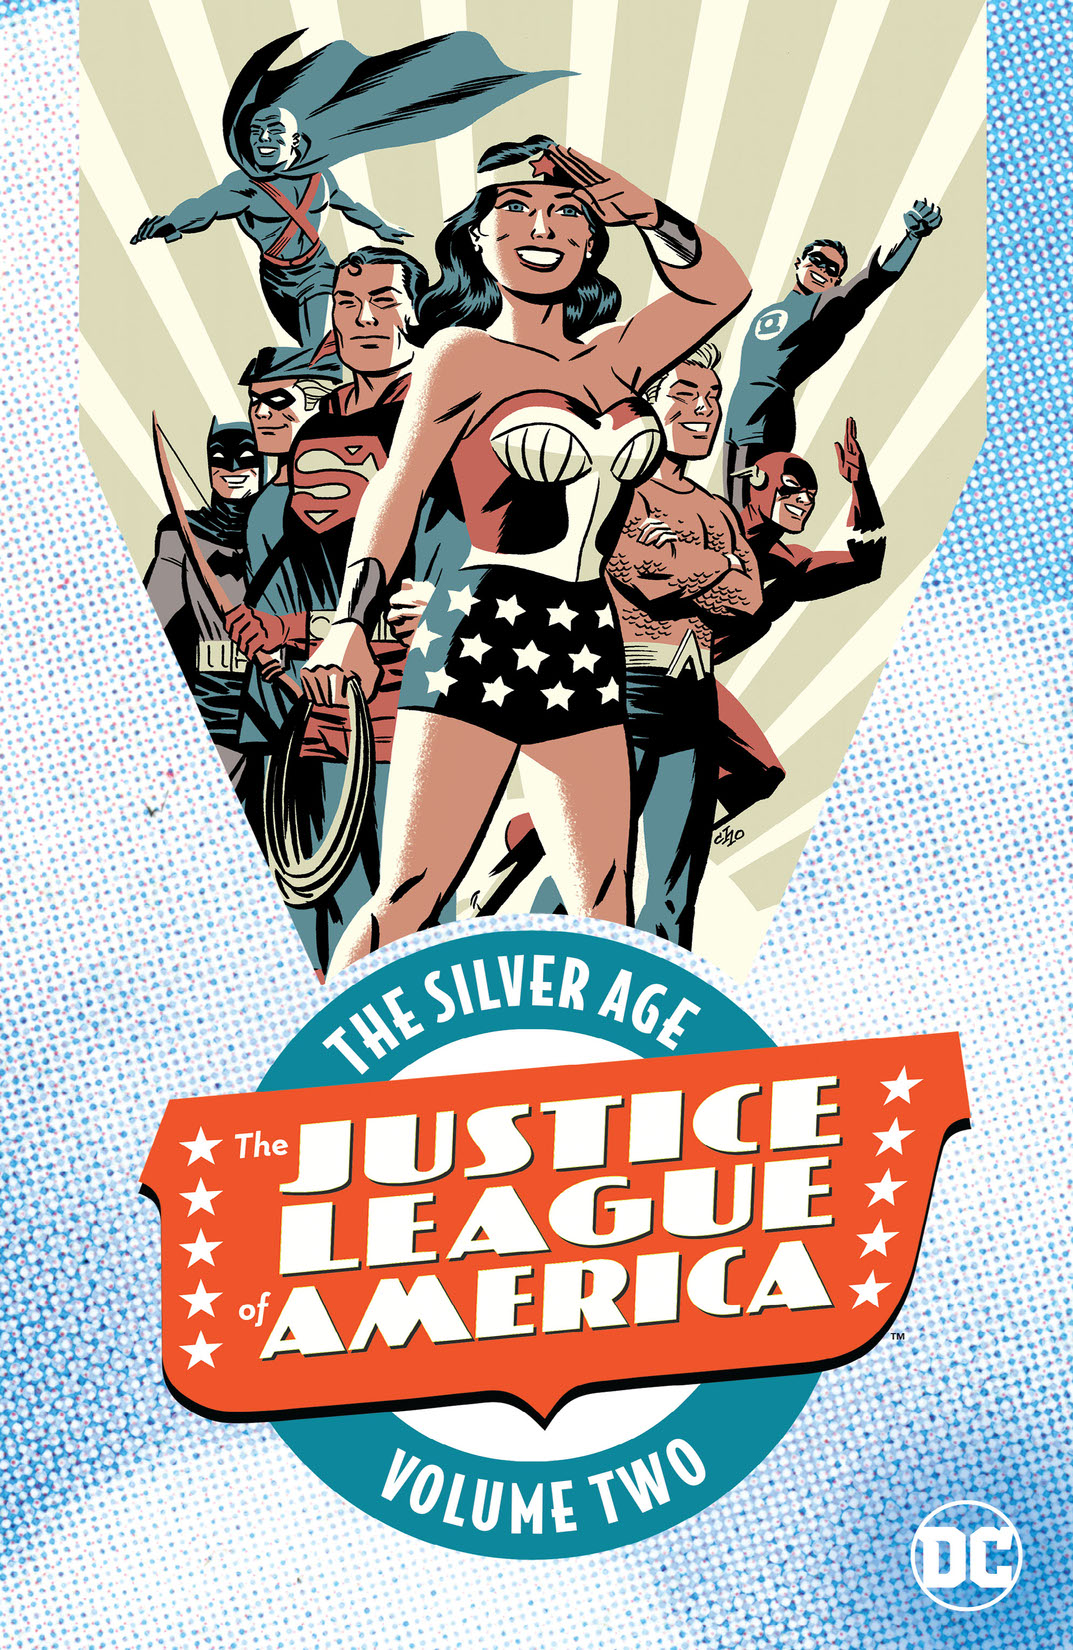 Justice League of America: The Silver Age Vol. 2 preview images